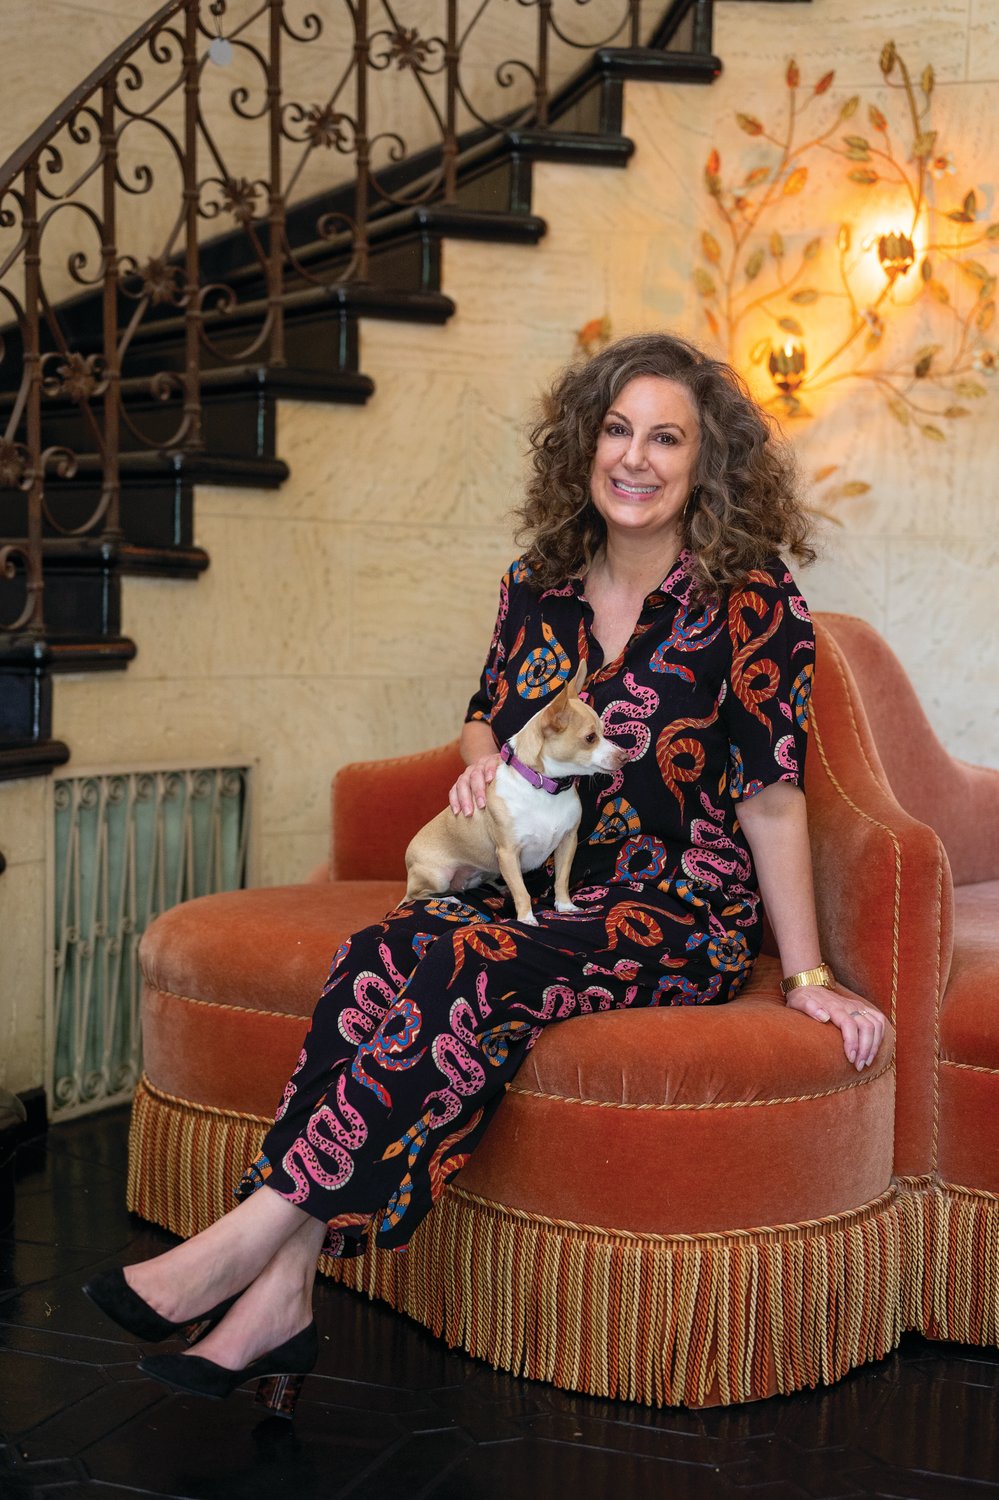 Screenwriter Kirsten “Kiwi” Smith and her recently adopted Chihuahua, “Trudie,” at her Los Angeles home.